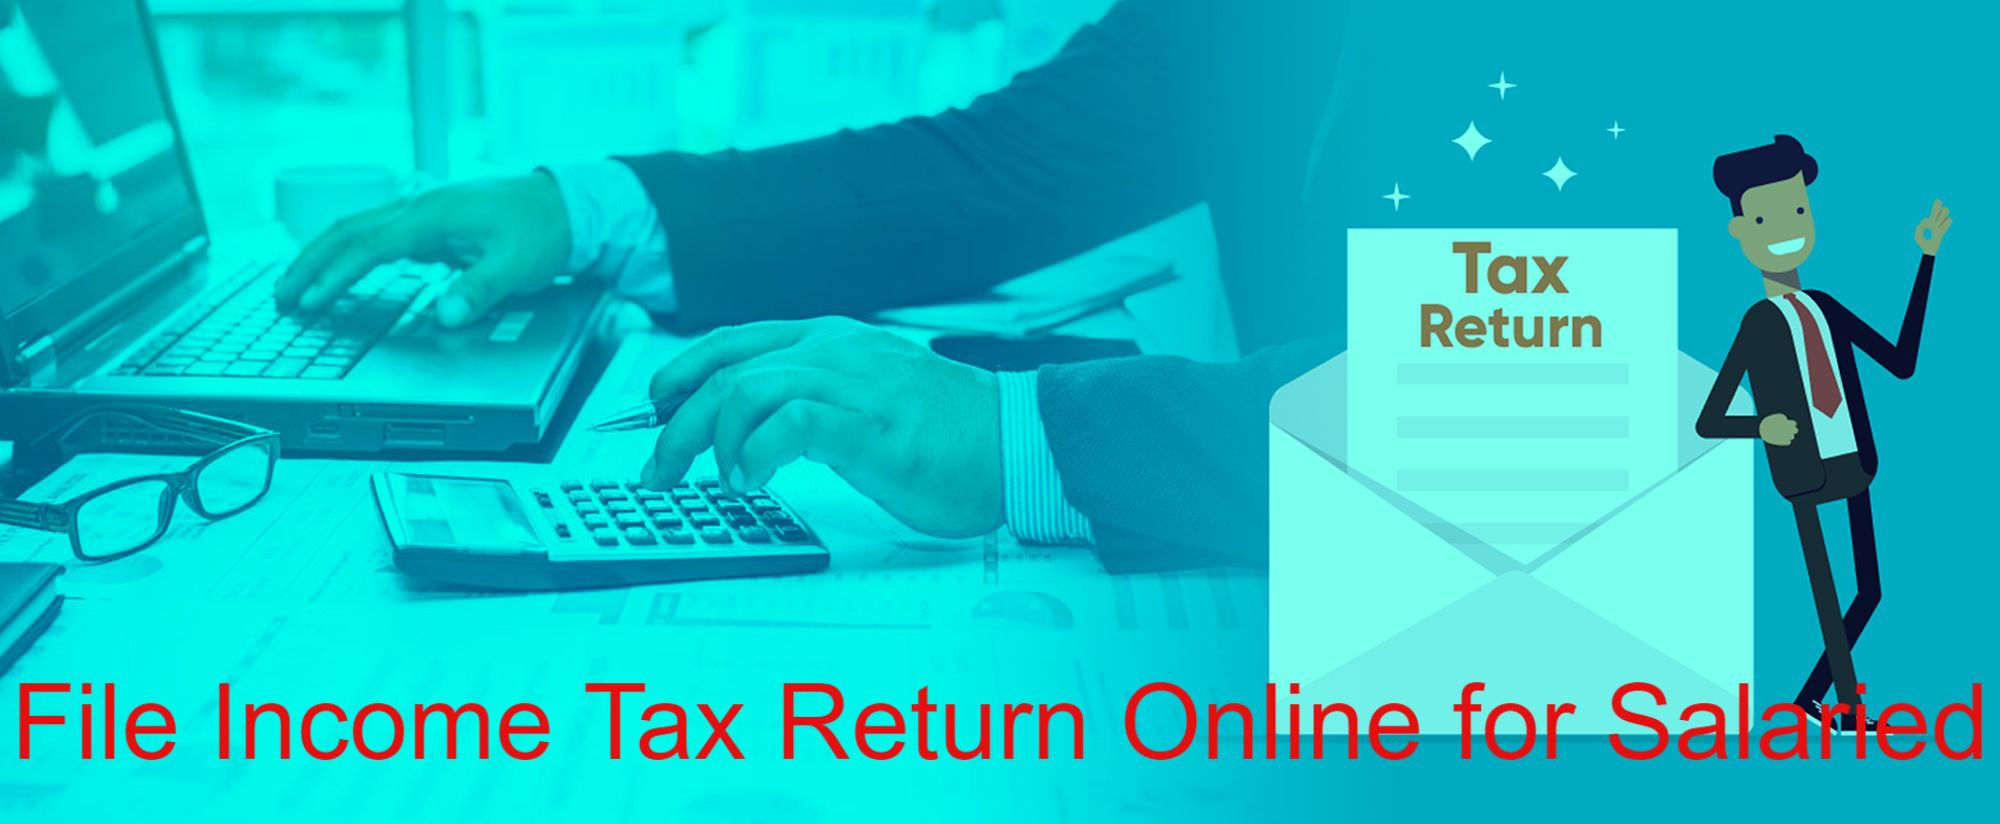 File Income Tax Return Online for Salaried Employees